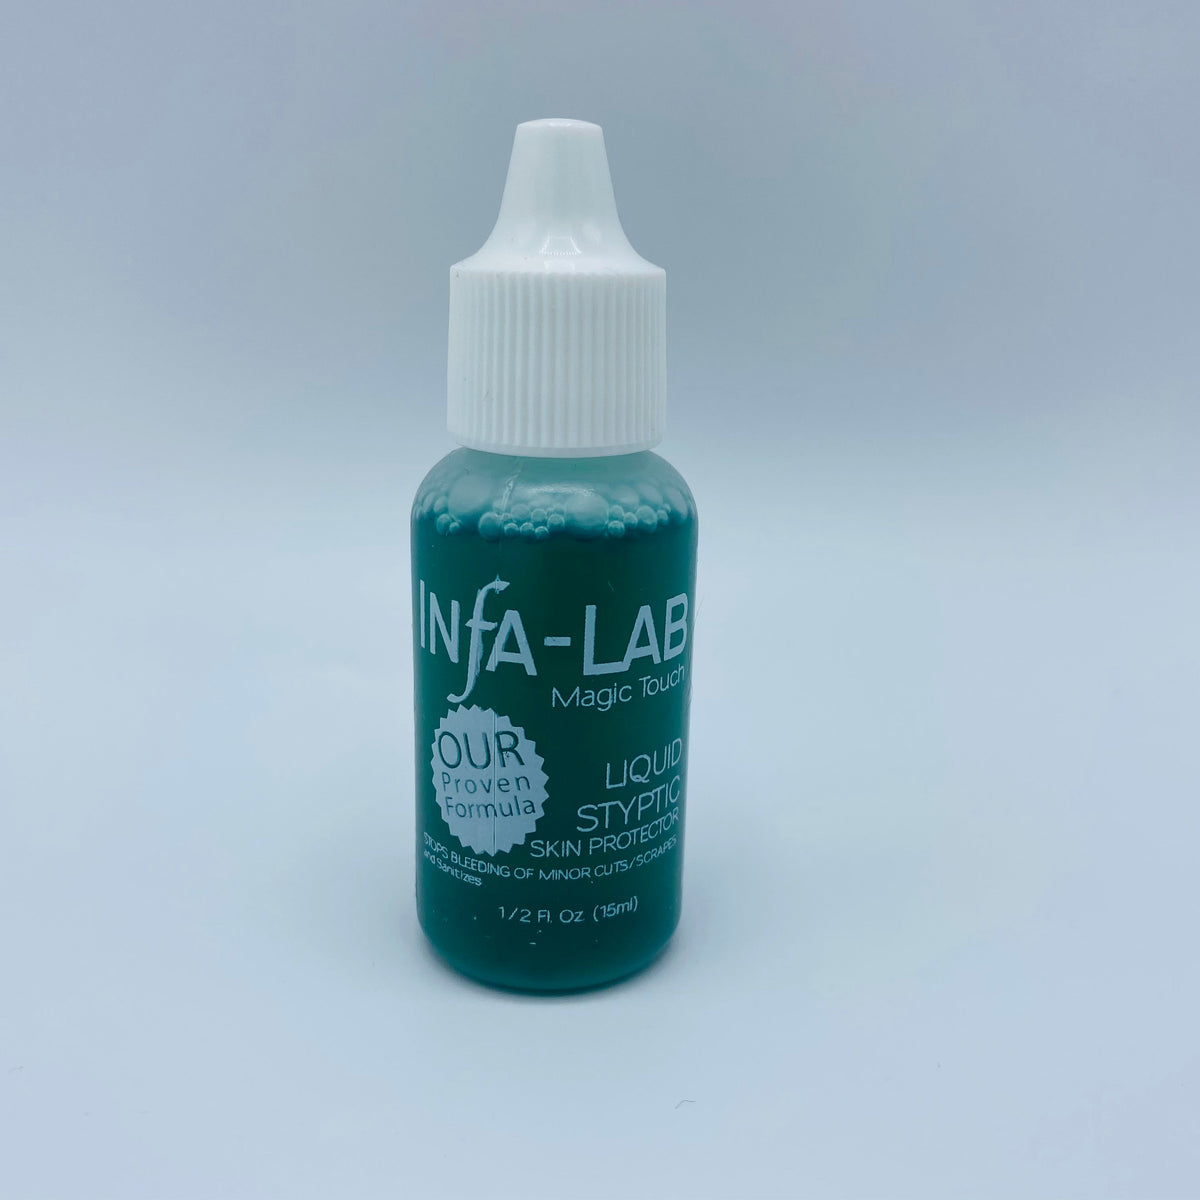  Infalab Lab Radical Touch Liquid Styptic .5 oz blue or green  by Infalab : Beauty & Personal Care